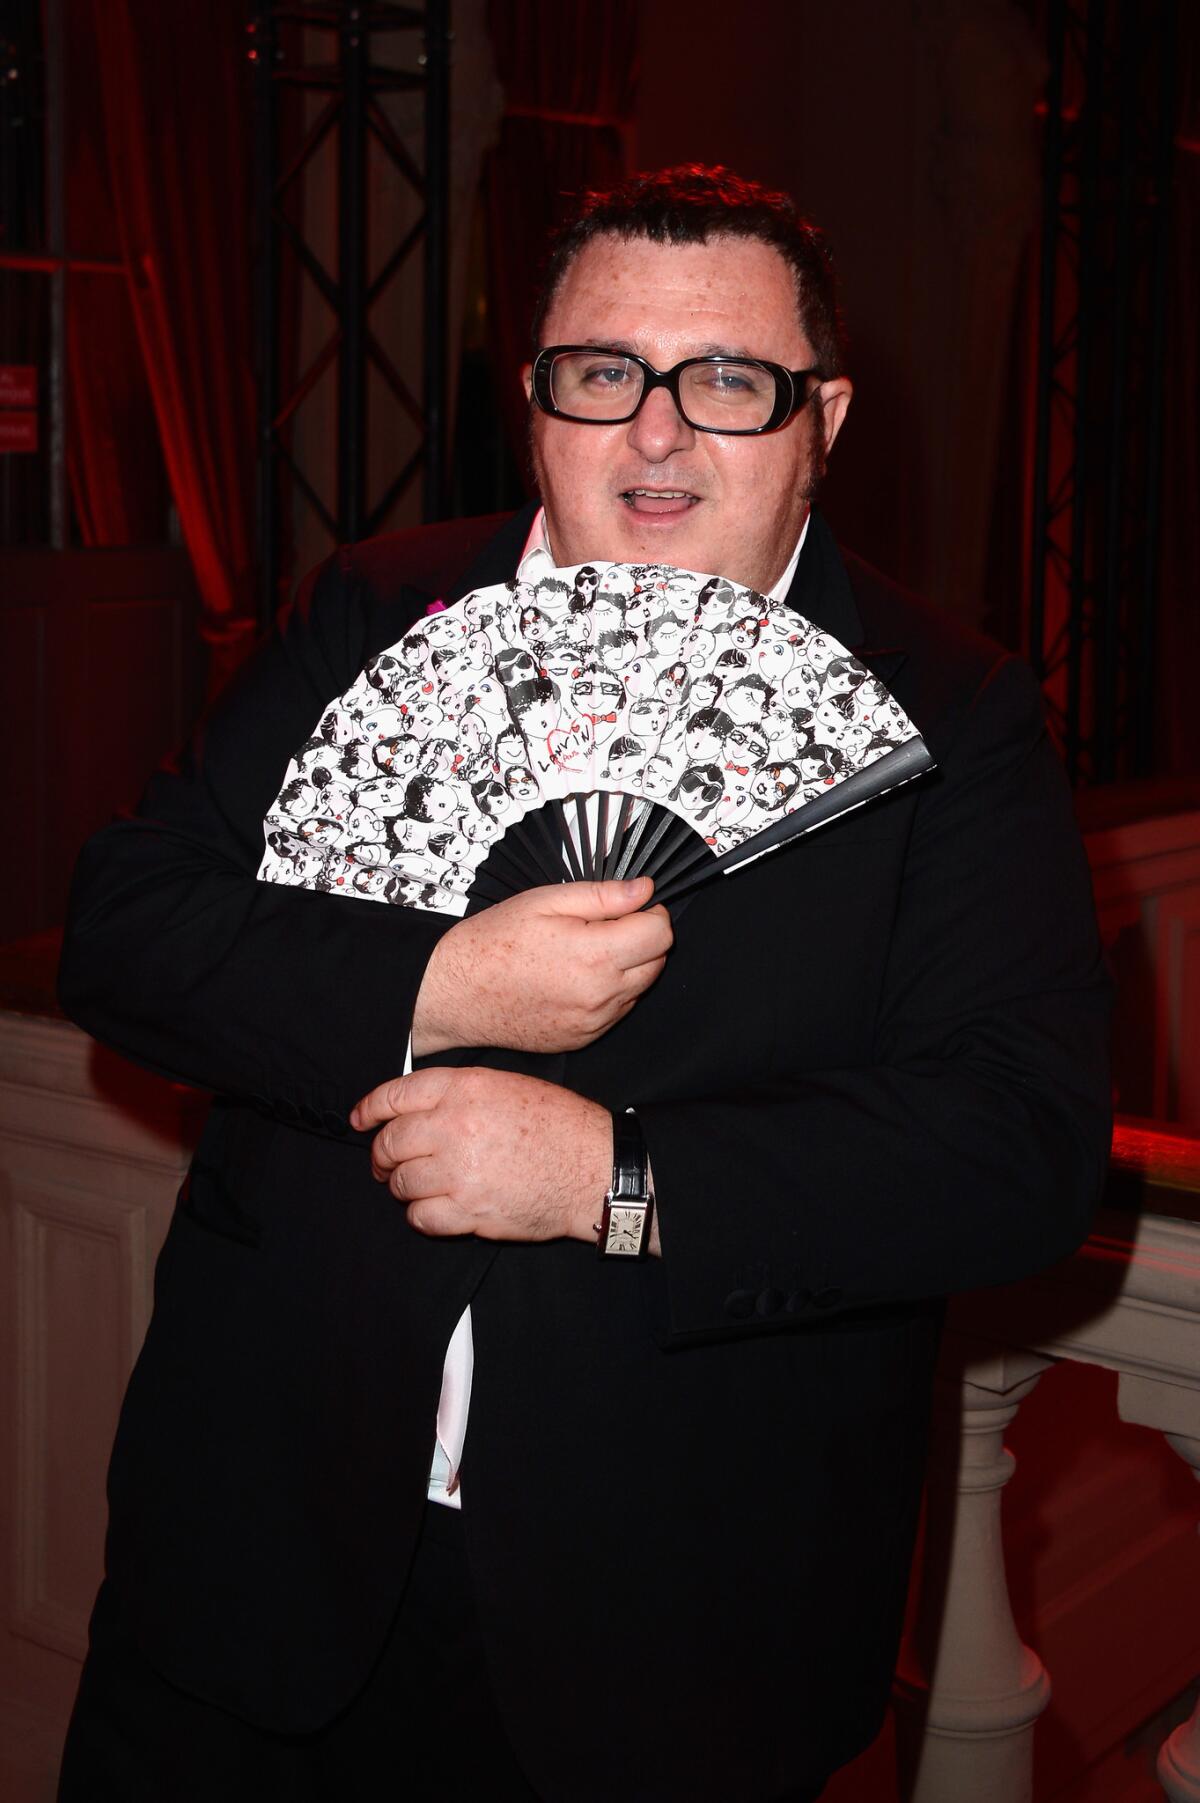 Alber Elbaz relaxes at the "Lancome Show By Alber Elbaz" party at Le Trianon on Tuesday in Paris.